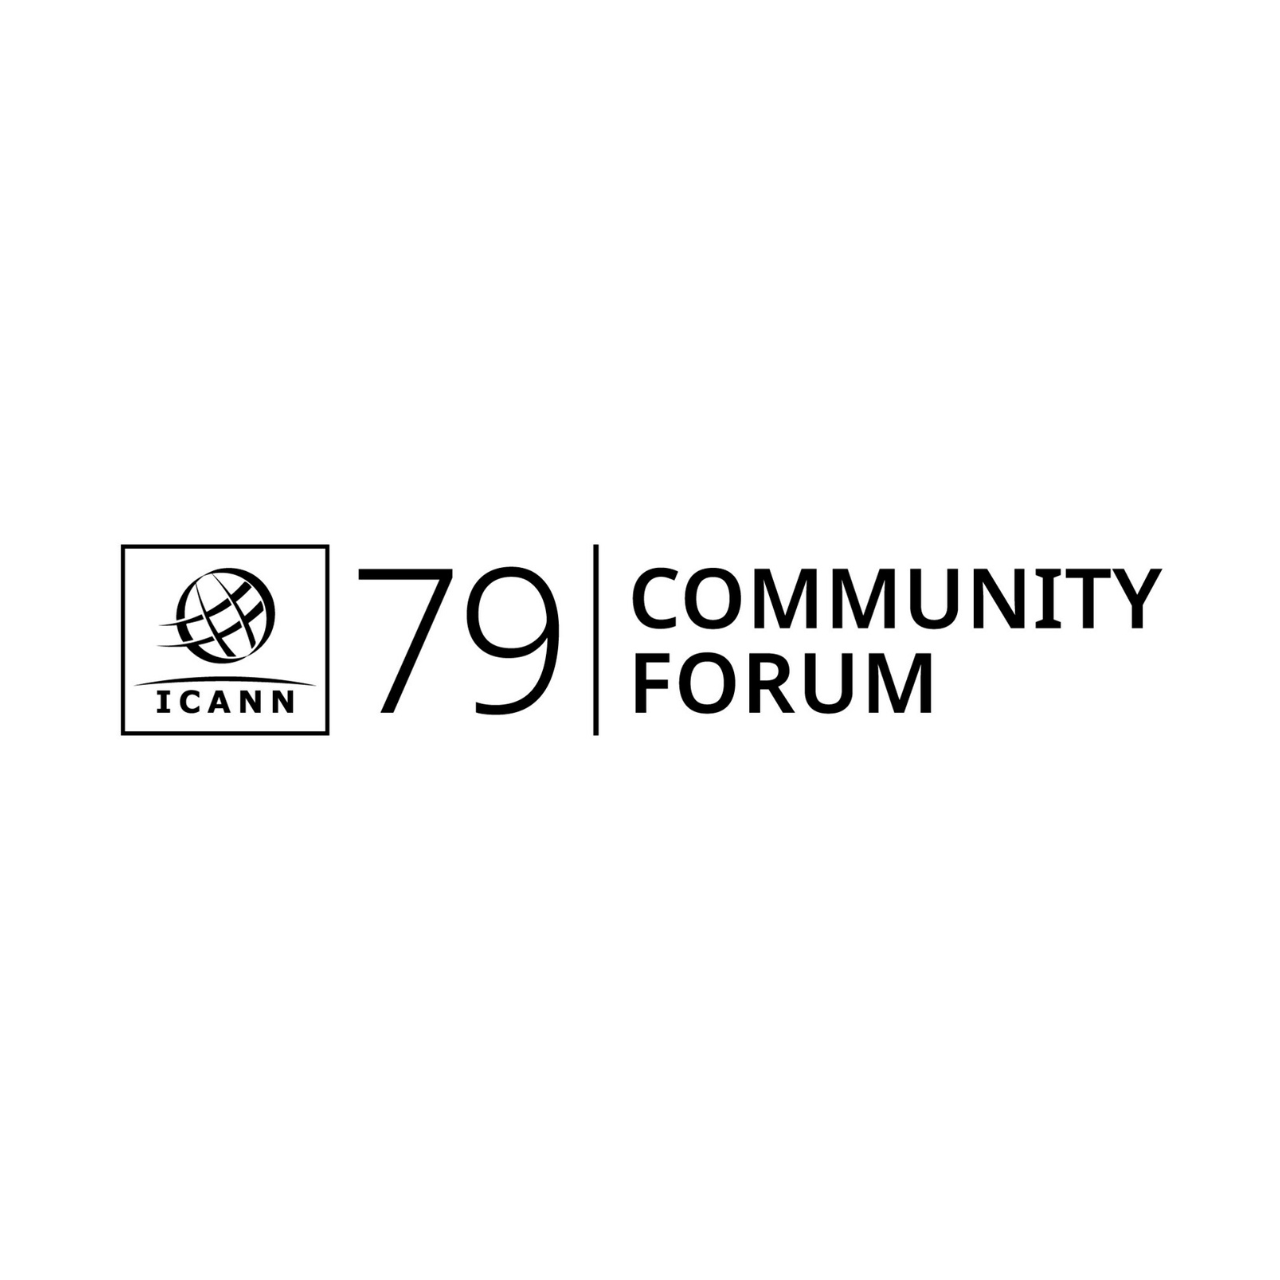 ICANN79: A Look at the Upcoming Community Forum and its Significance for the Domain Name Industry